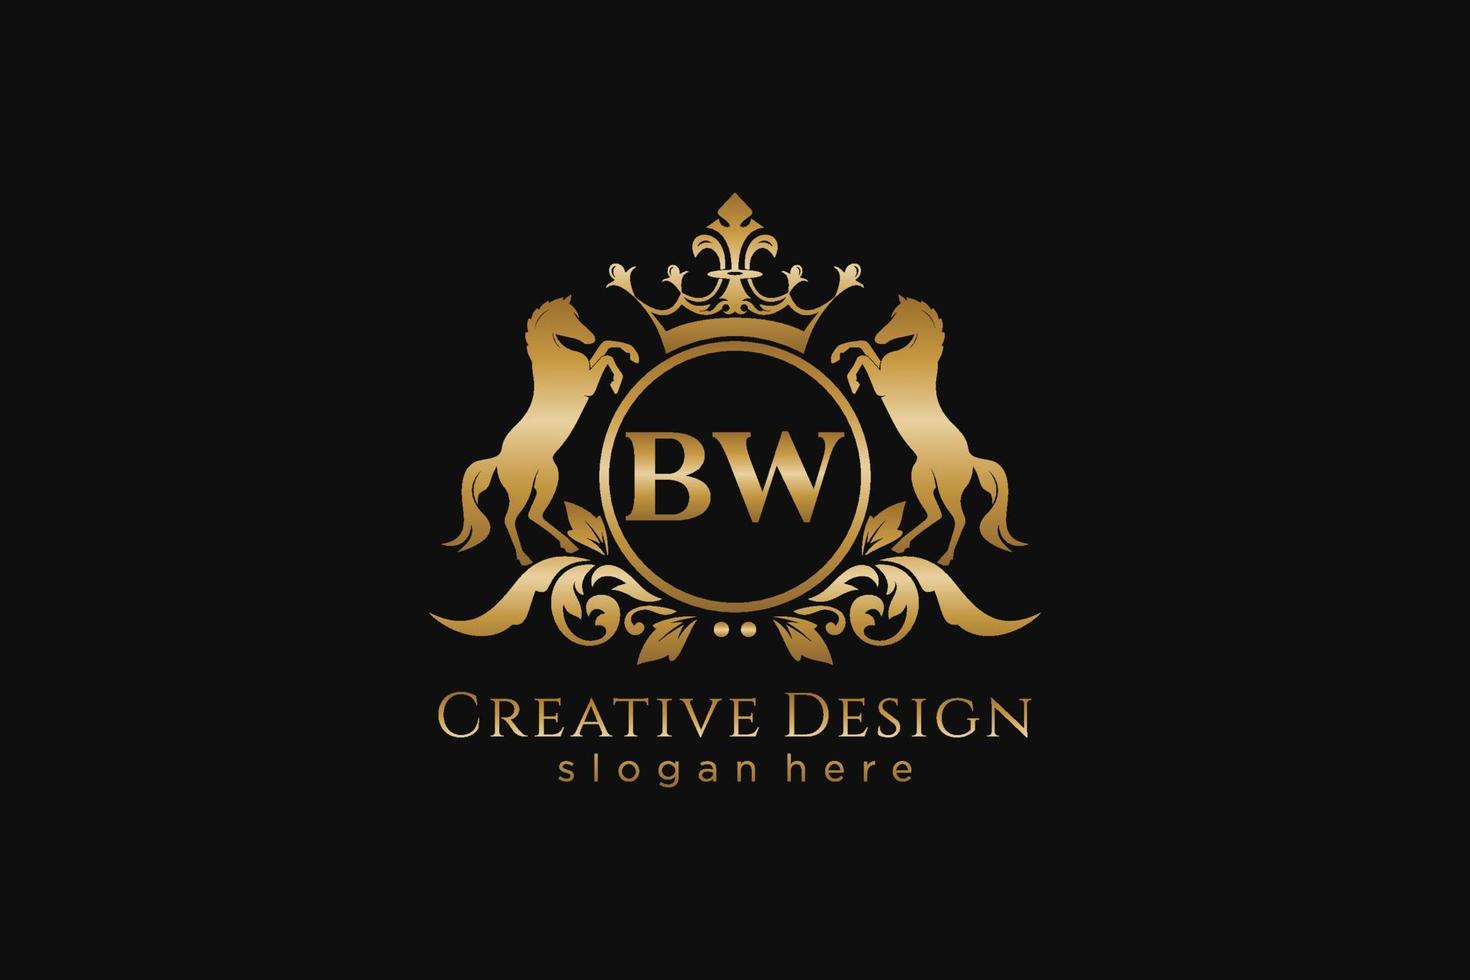 initial BW Retro golden crest with circle and two horses, badge template with scrolls and royal crown - perfect for luxurious branding projects vector